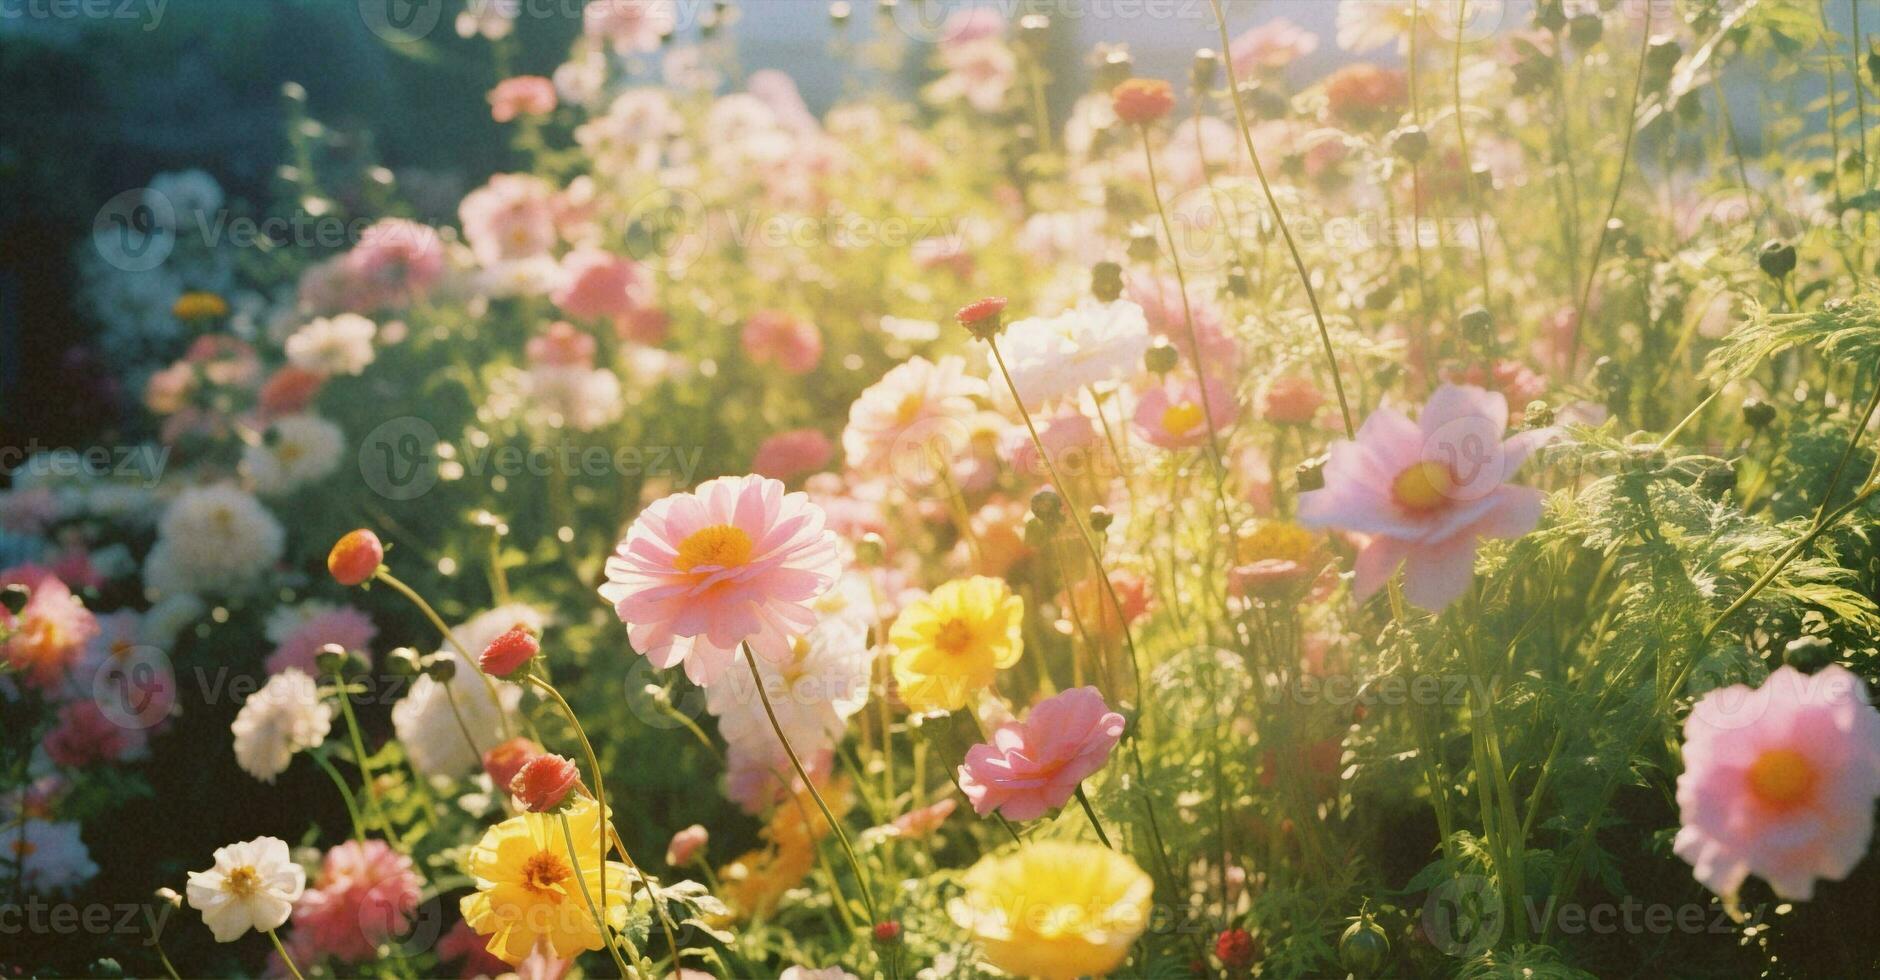 Spring nature summer flower floral plant gardening sunny field pink photo